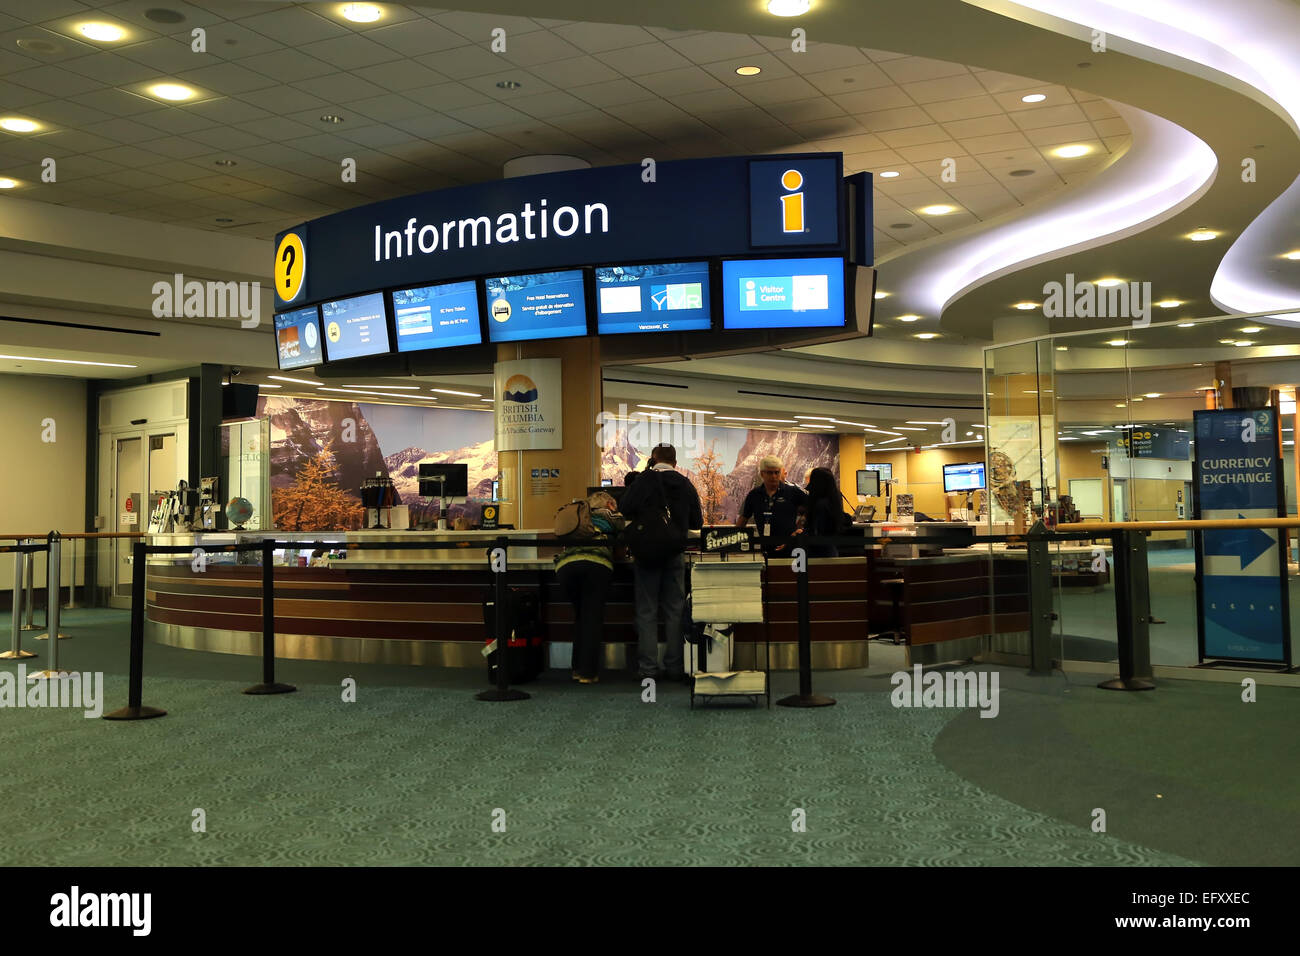 Vancouver, BC Canada - September 13, 2014 : People asking some information insdie the YVR airport in Vancouver BC Canada. Stock Photo